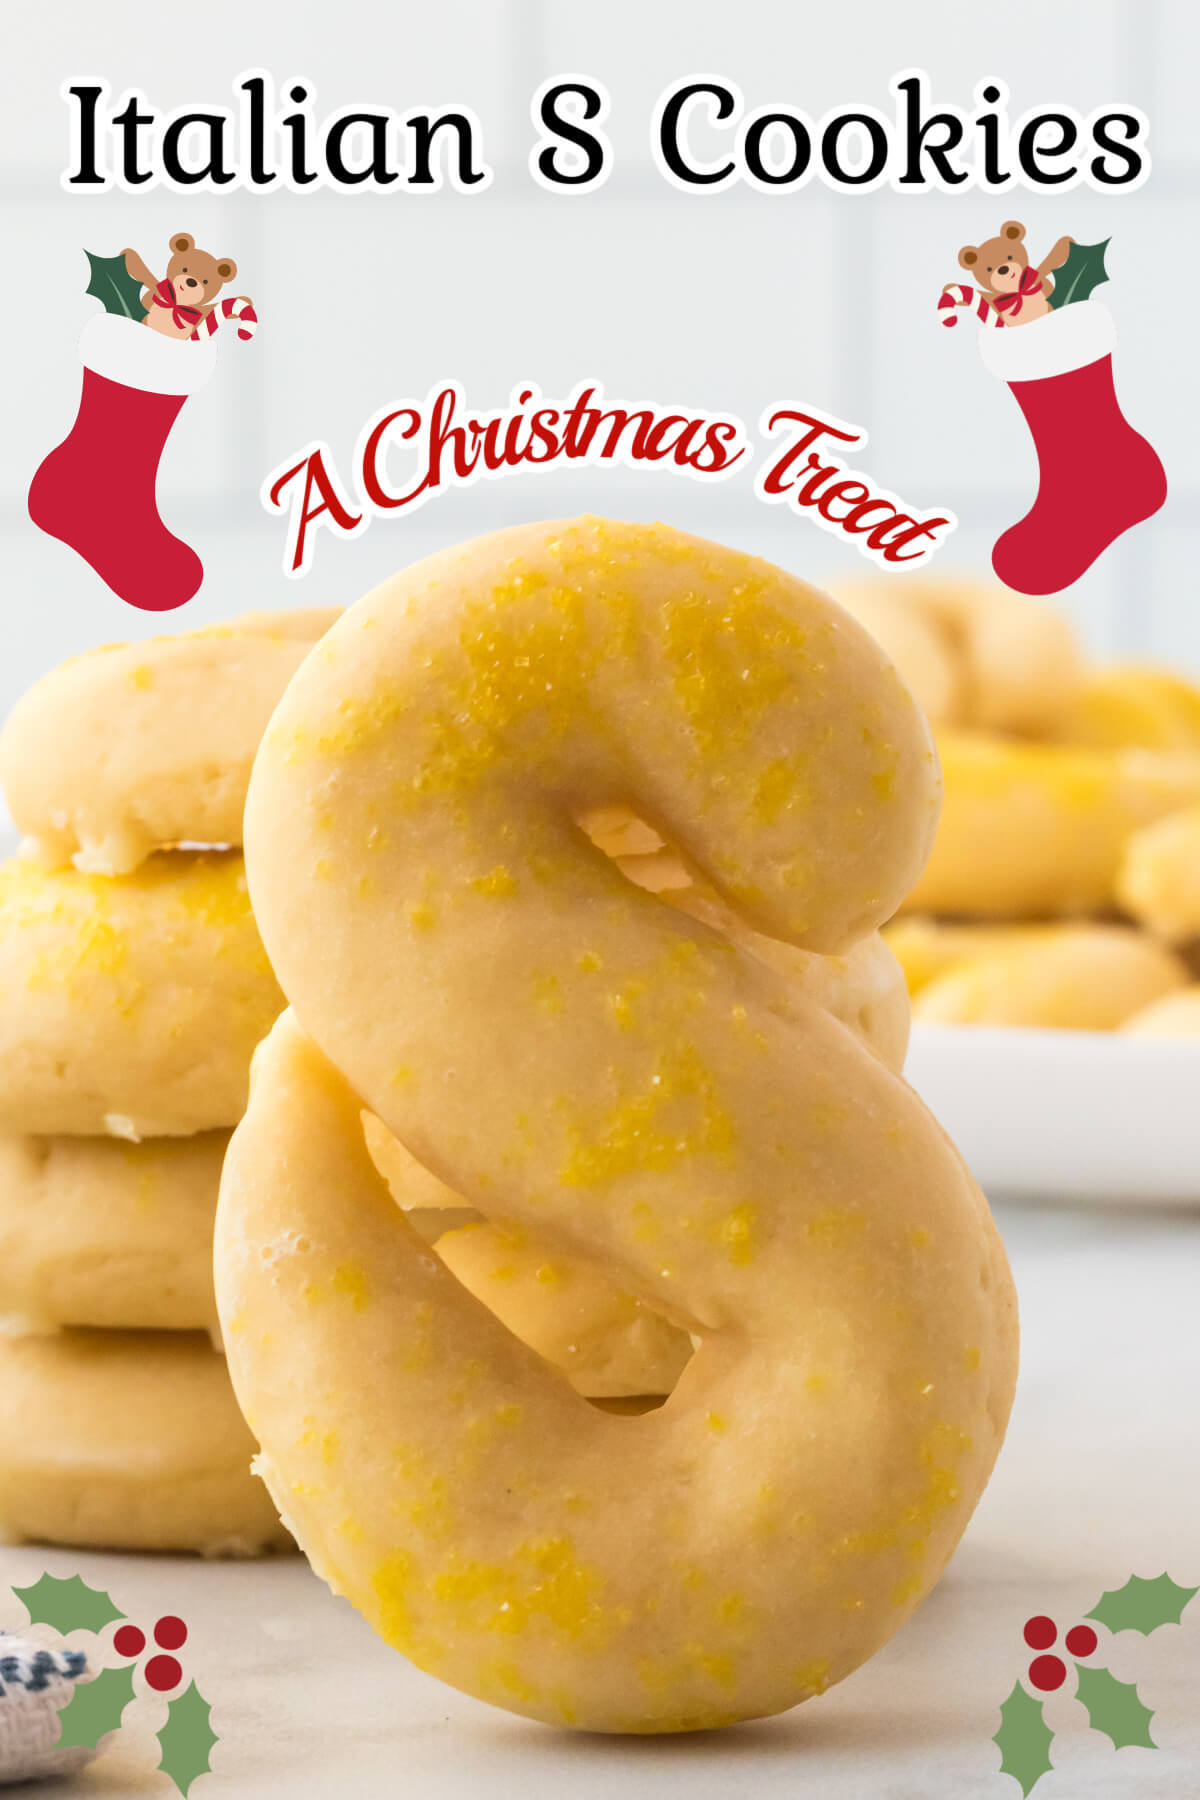 Christmas S Cookies with a yellow glaze.